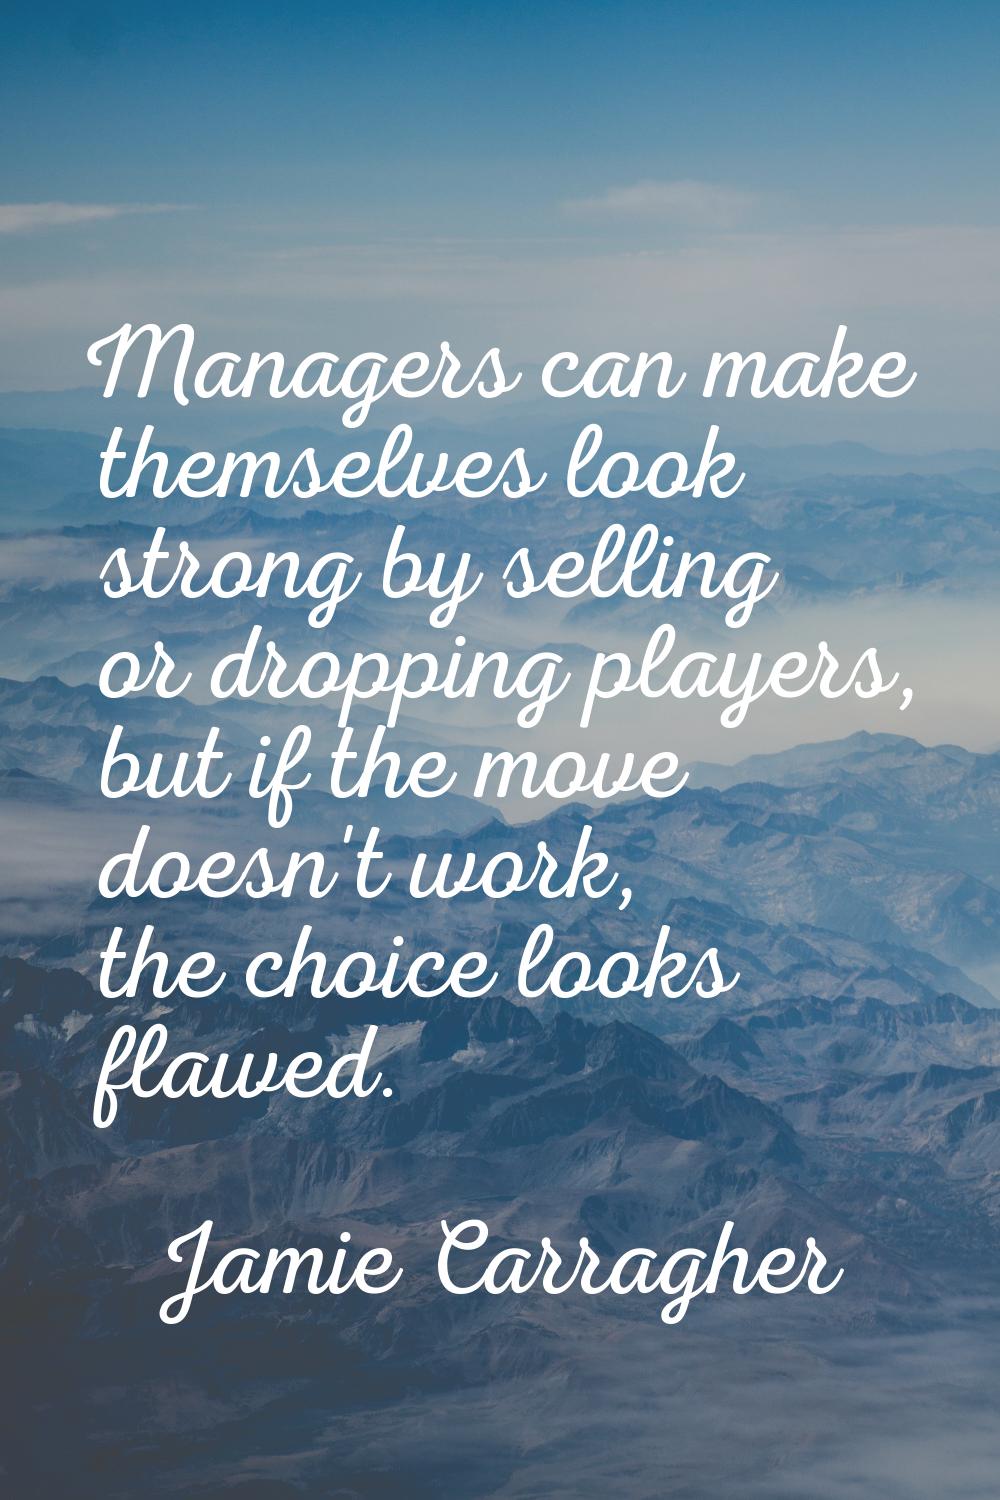 Managers can make themselves look strong by selling or dropping players, but if the move doesn't wo